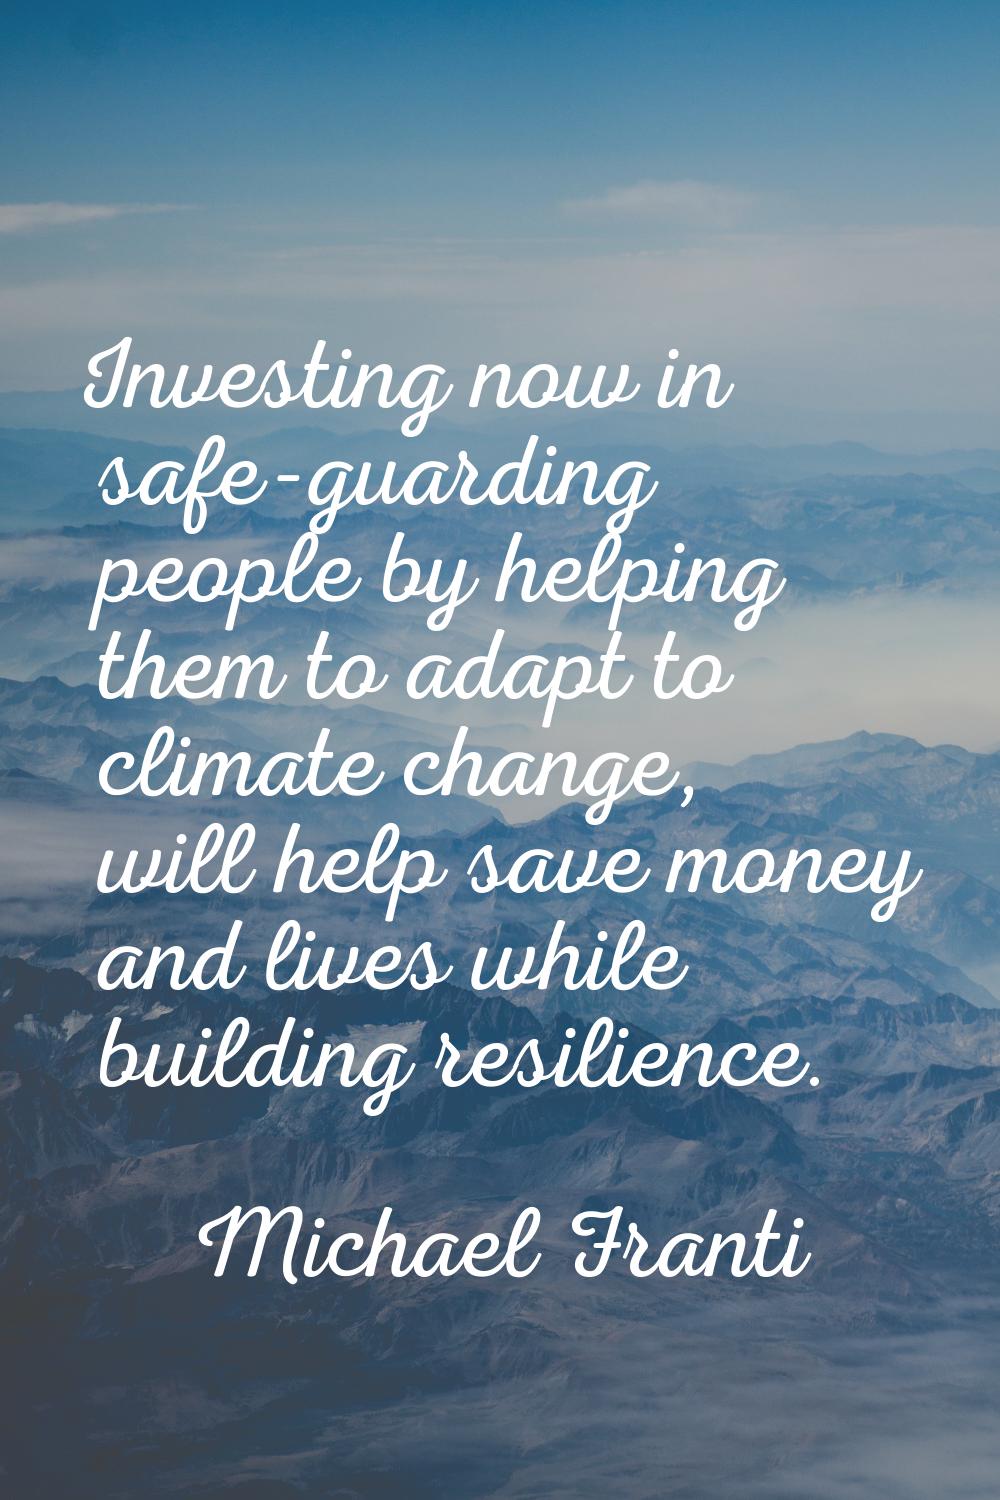 Investing now in safe-guarding people by helping them to adapt to climate change, will help save mo